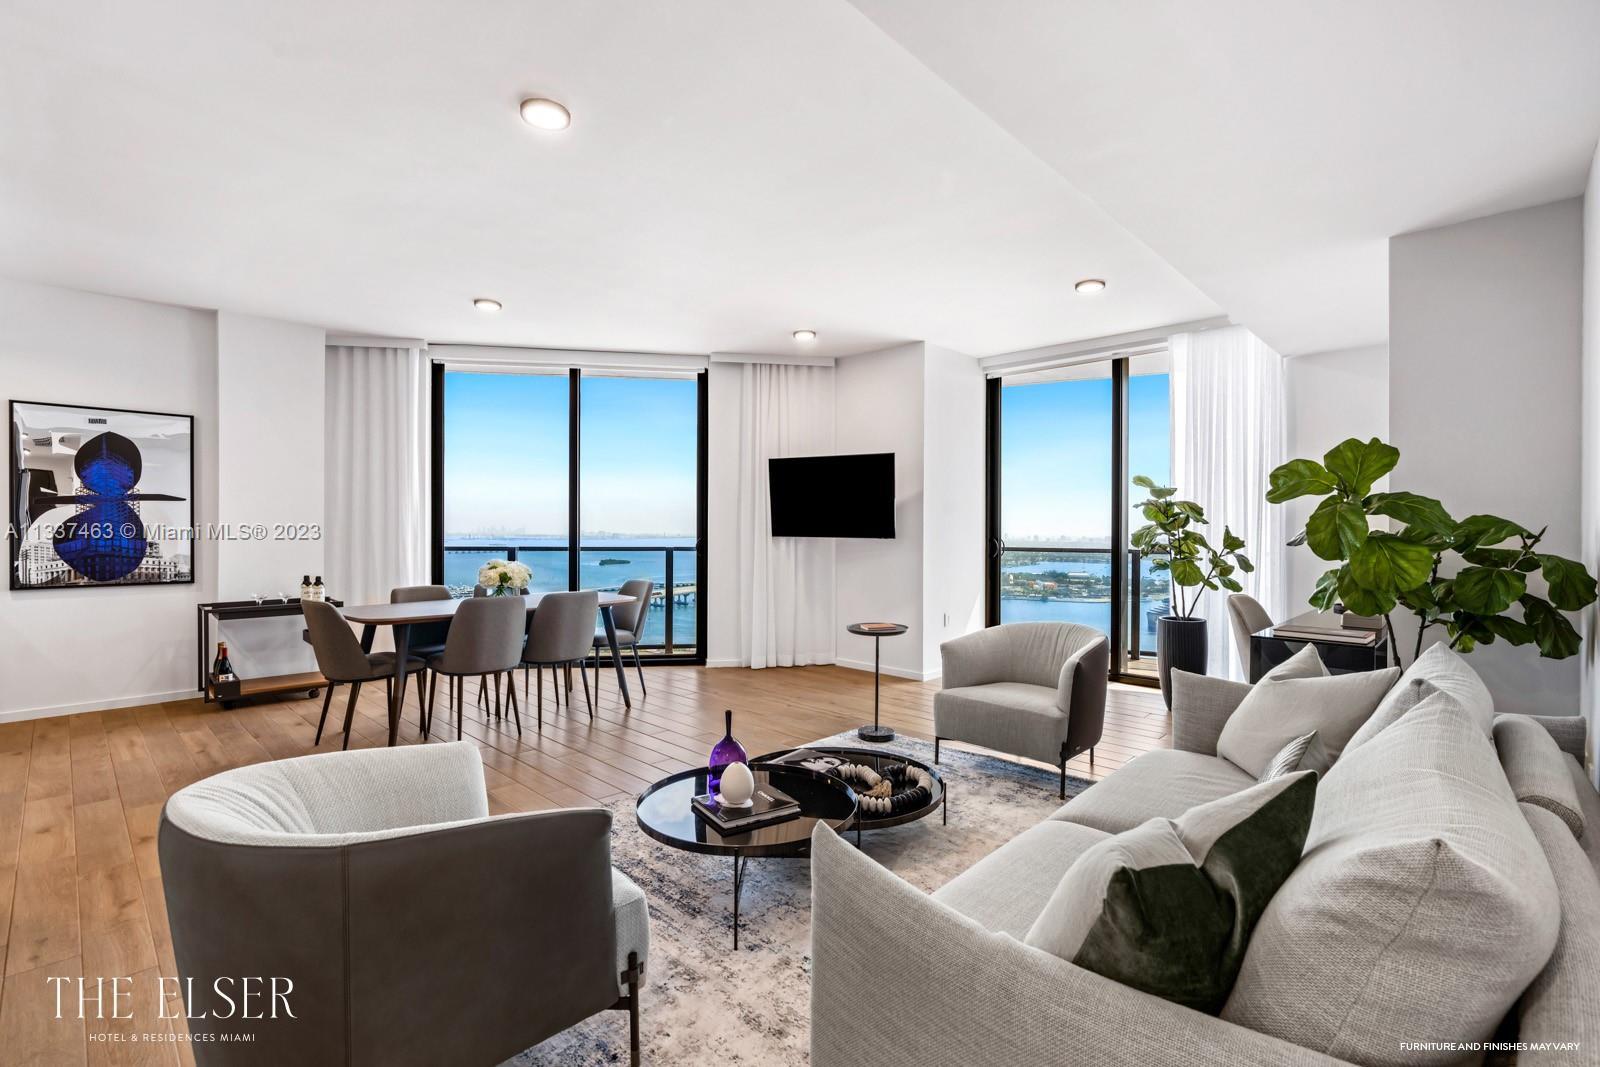 The Elser Residences Is a Collection of Cultivated Studios, 1-, 2- and 3-Bedrooms. Positioned in Mia